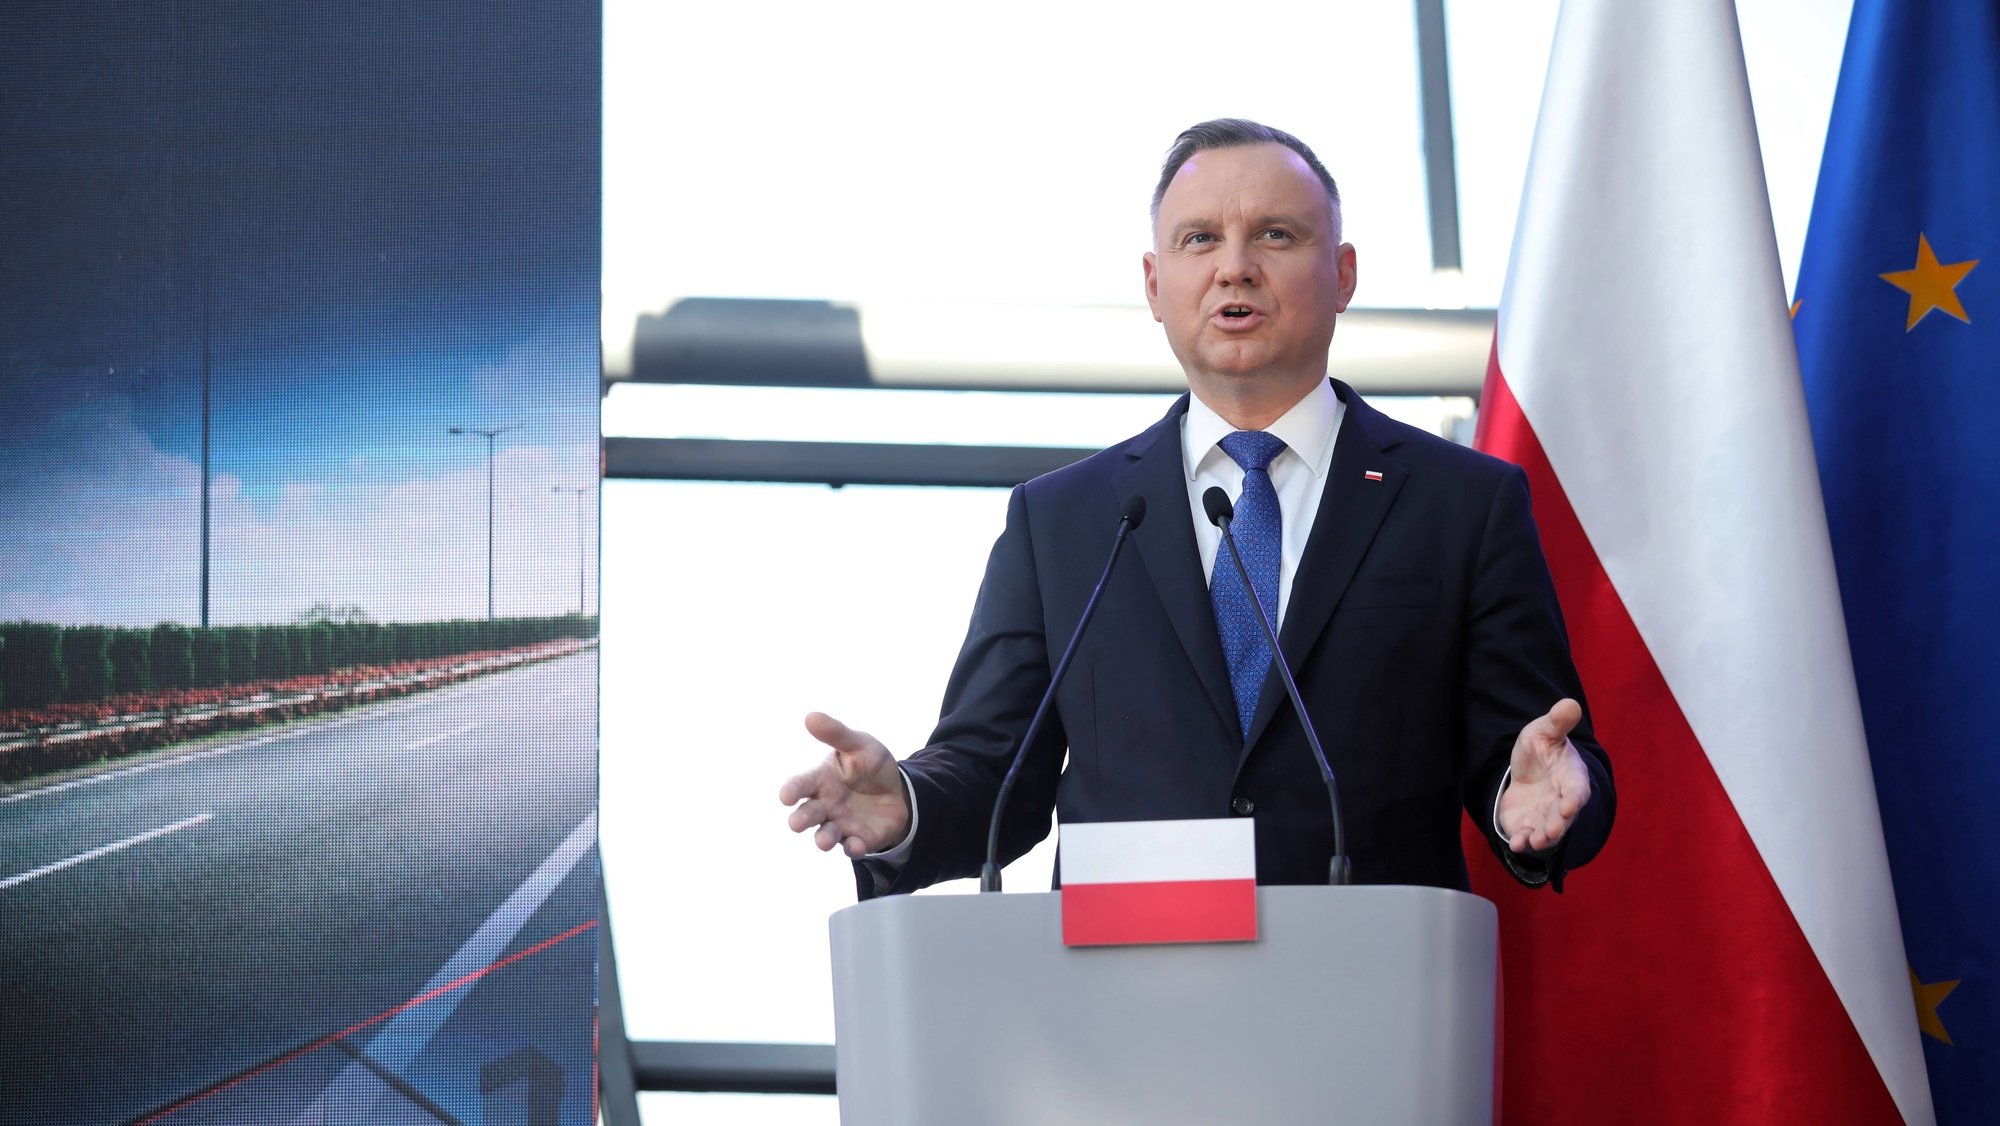 epa09992265 Polish President Andrzej Duda speaks during a joint press conference with Polish Prime Minister Mateusz Morawiecki and President of EU Commission Ursula von der Leyen at the Polish electricity transmission system operator PSE S.A. headquarters in Konstancin-Jeziorna, near Warsaw, Poland, 02 June 2022. Von der Leyen visits Poland after the European Commission approved the country&#039;s National Recovery Plan (KPO).  EPA/LESZEK SZYMANSKI POLAND OUT